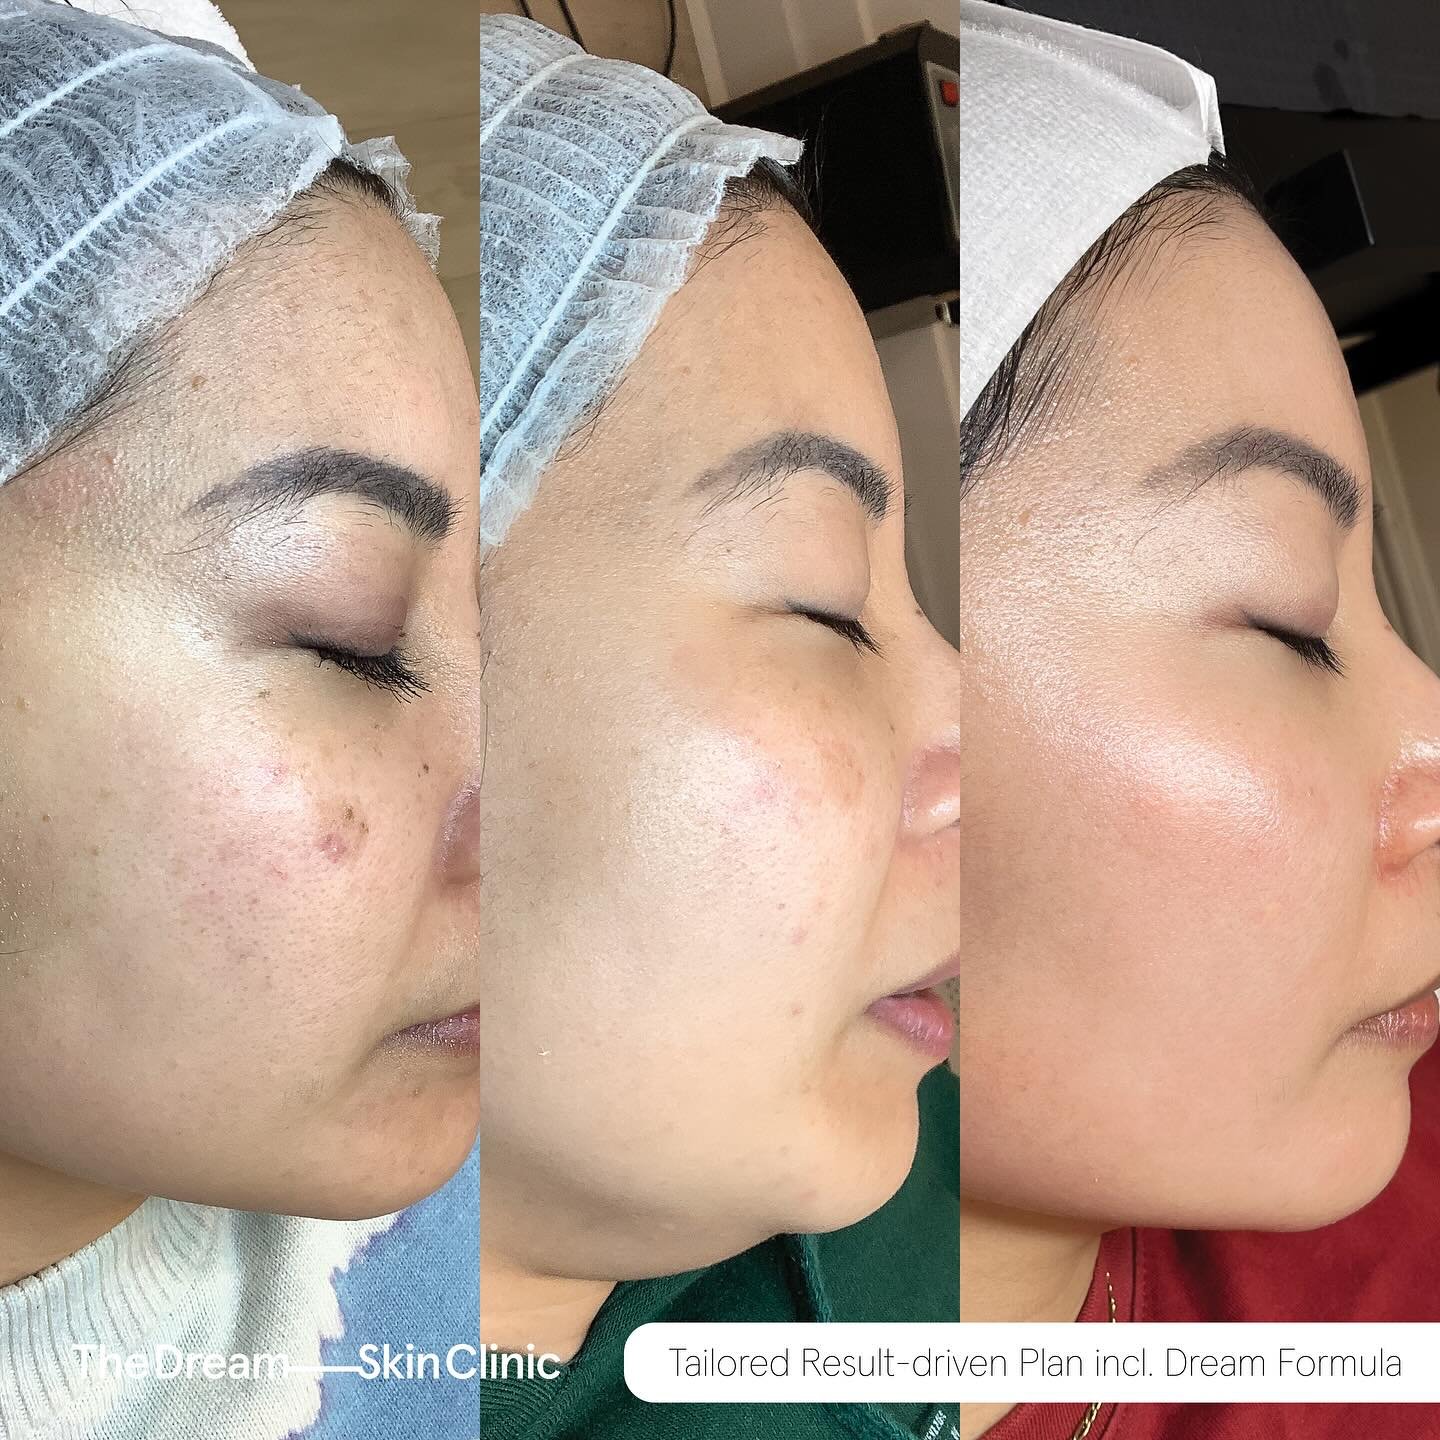 This client&rsquo;s concerns were:
∙ Dullness
∙ Pigmentation
∙ Uneven skin tone 

Book a skin consultation using the link in our bio and get started on your skin journey with The Dream Skin Clinic!

*These photographs were captured and shared with cl